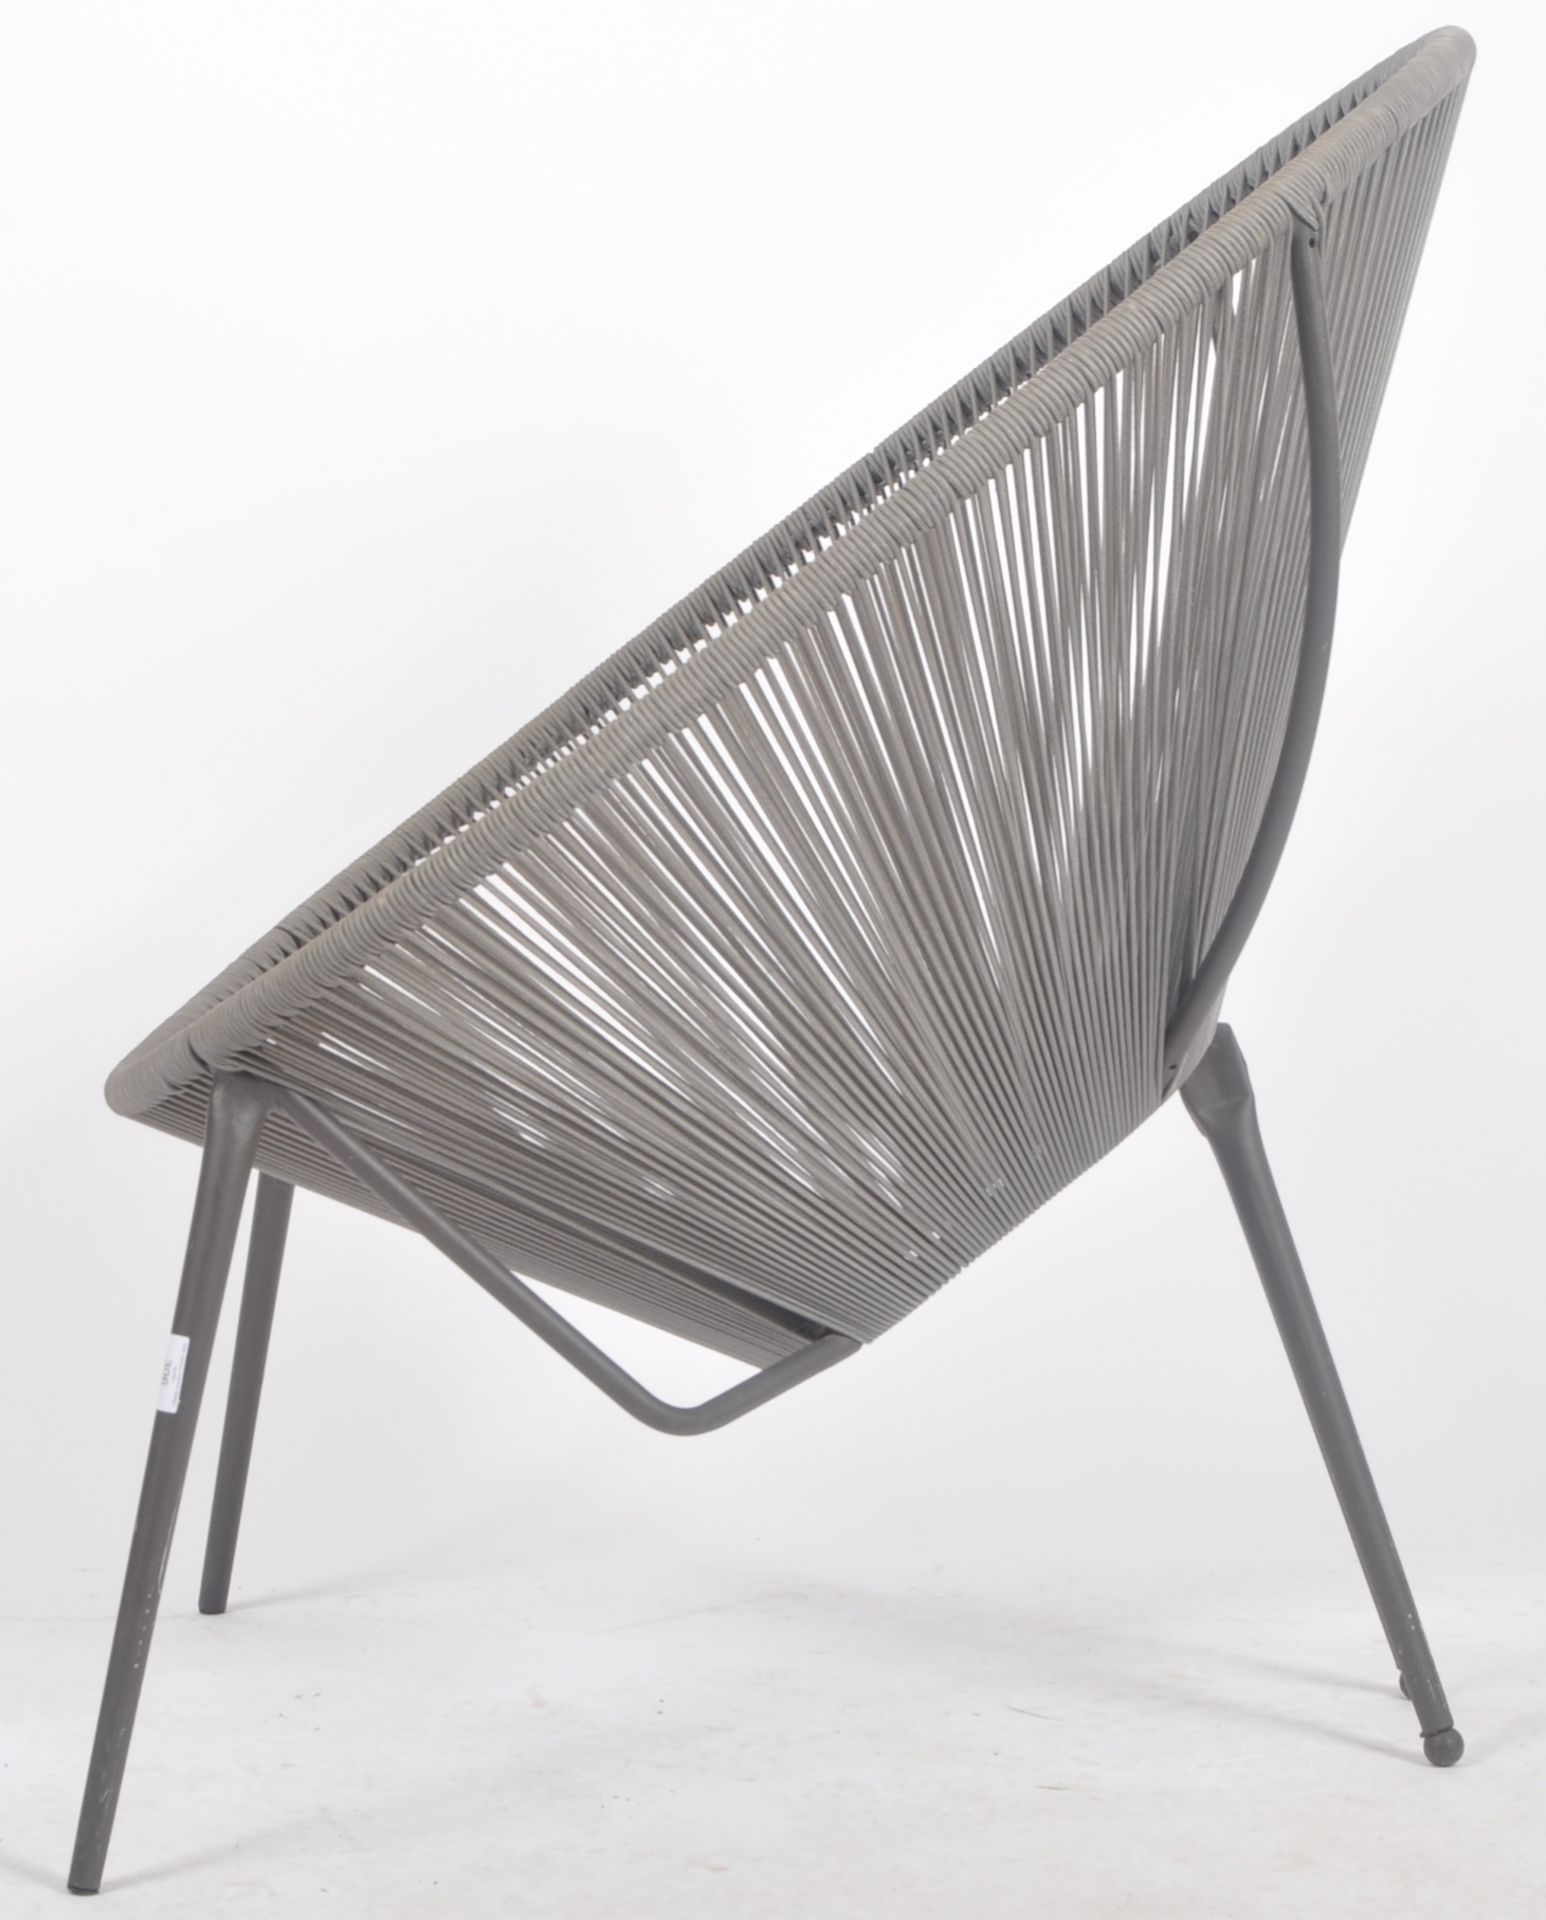 CONTEMPORARY DESIGNER EGG CHAIR / LOUNGE CHAIR - Image 7 of 7